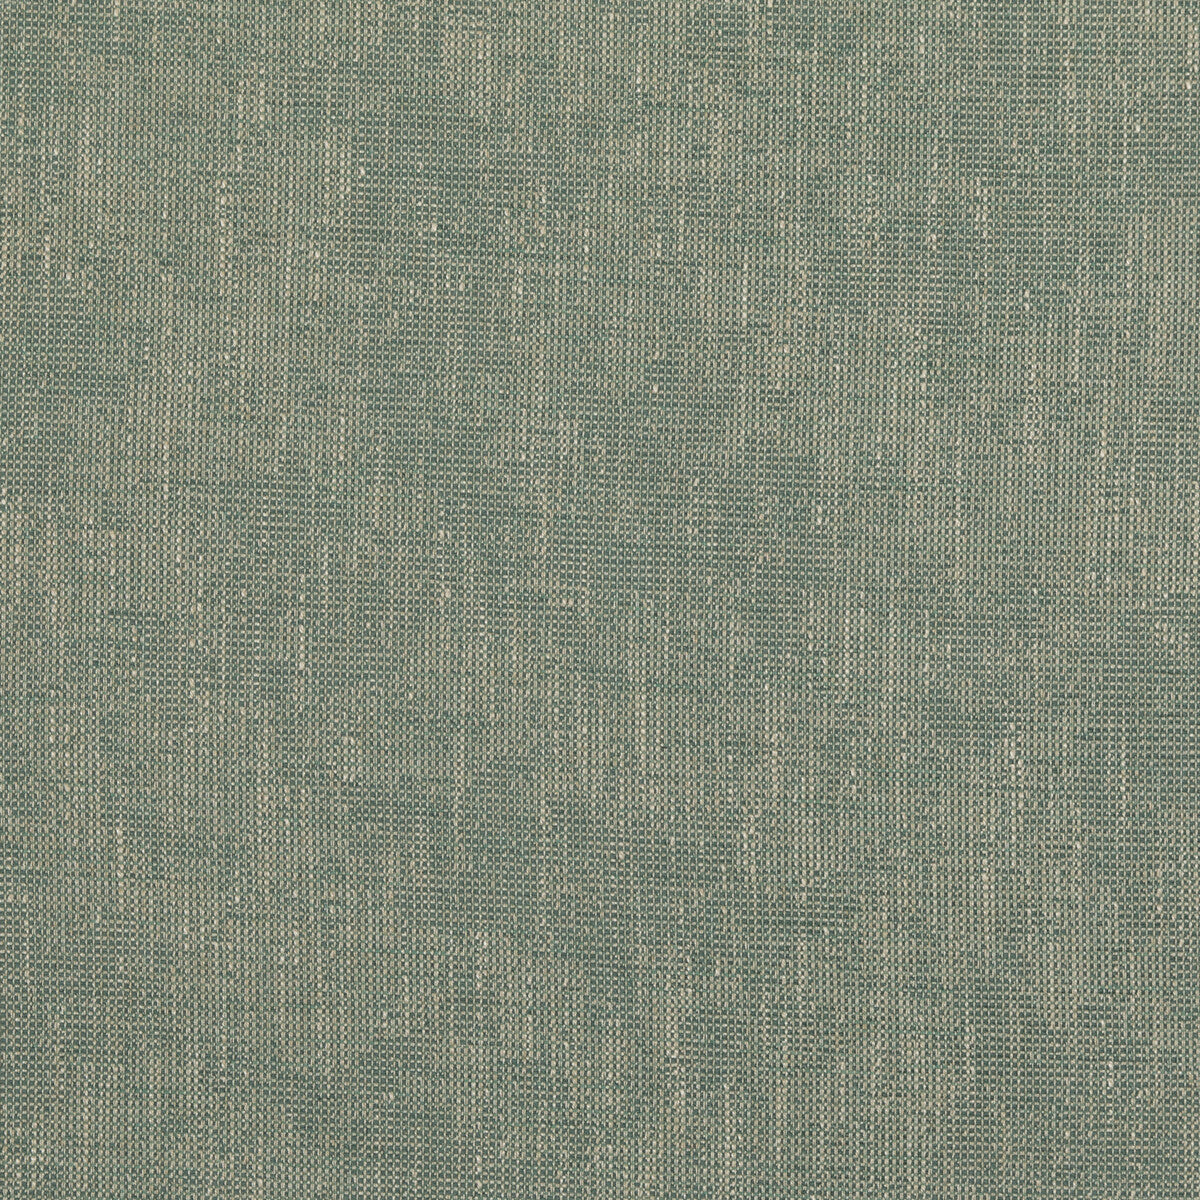 Bower fabric in aqua color - pattern PF50489.725.0 - by Baker Lifestyle in the Block Weaves collection